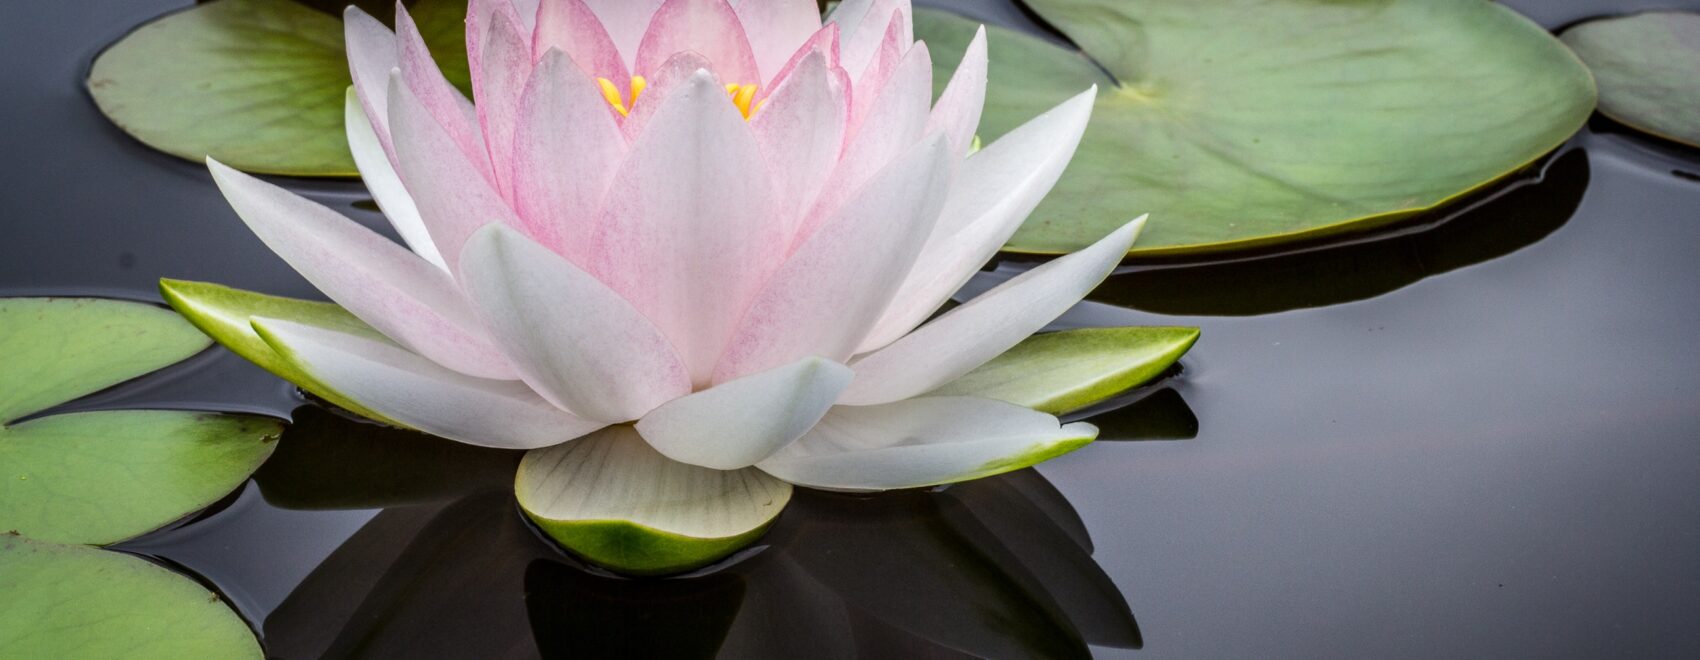 Image of a lotus flower on the water by lily pads. We want to help you live pain free with holistic acupuncture in the Chicago area. Restore your health with acupuncture in Orland Park, IL 60477. Call today to talk to our acupuncturist in Orland Park, IL 60465.